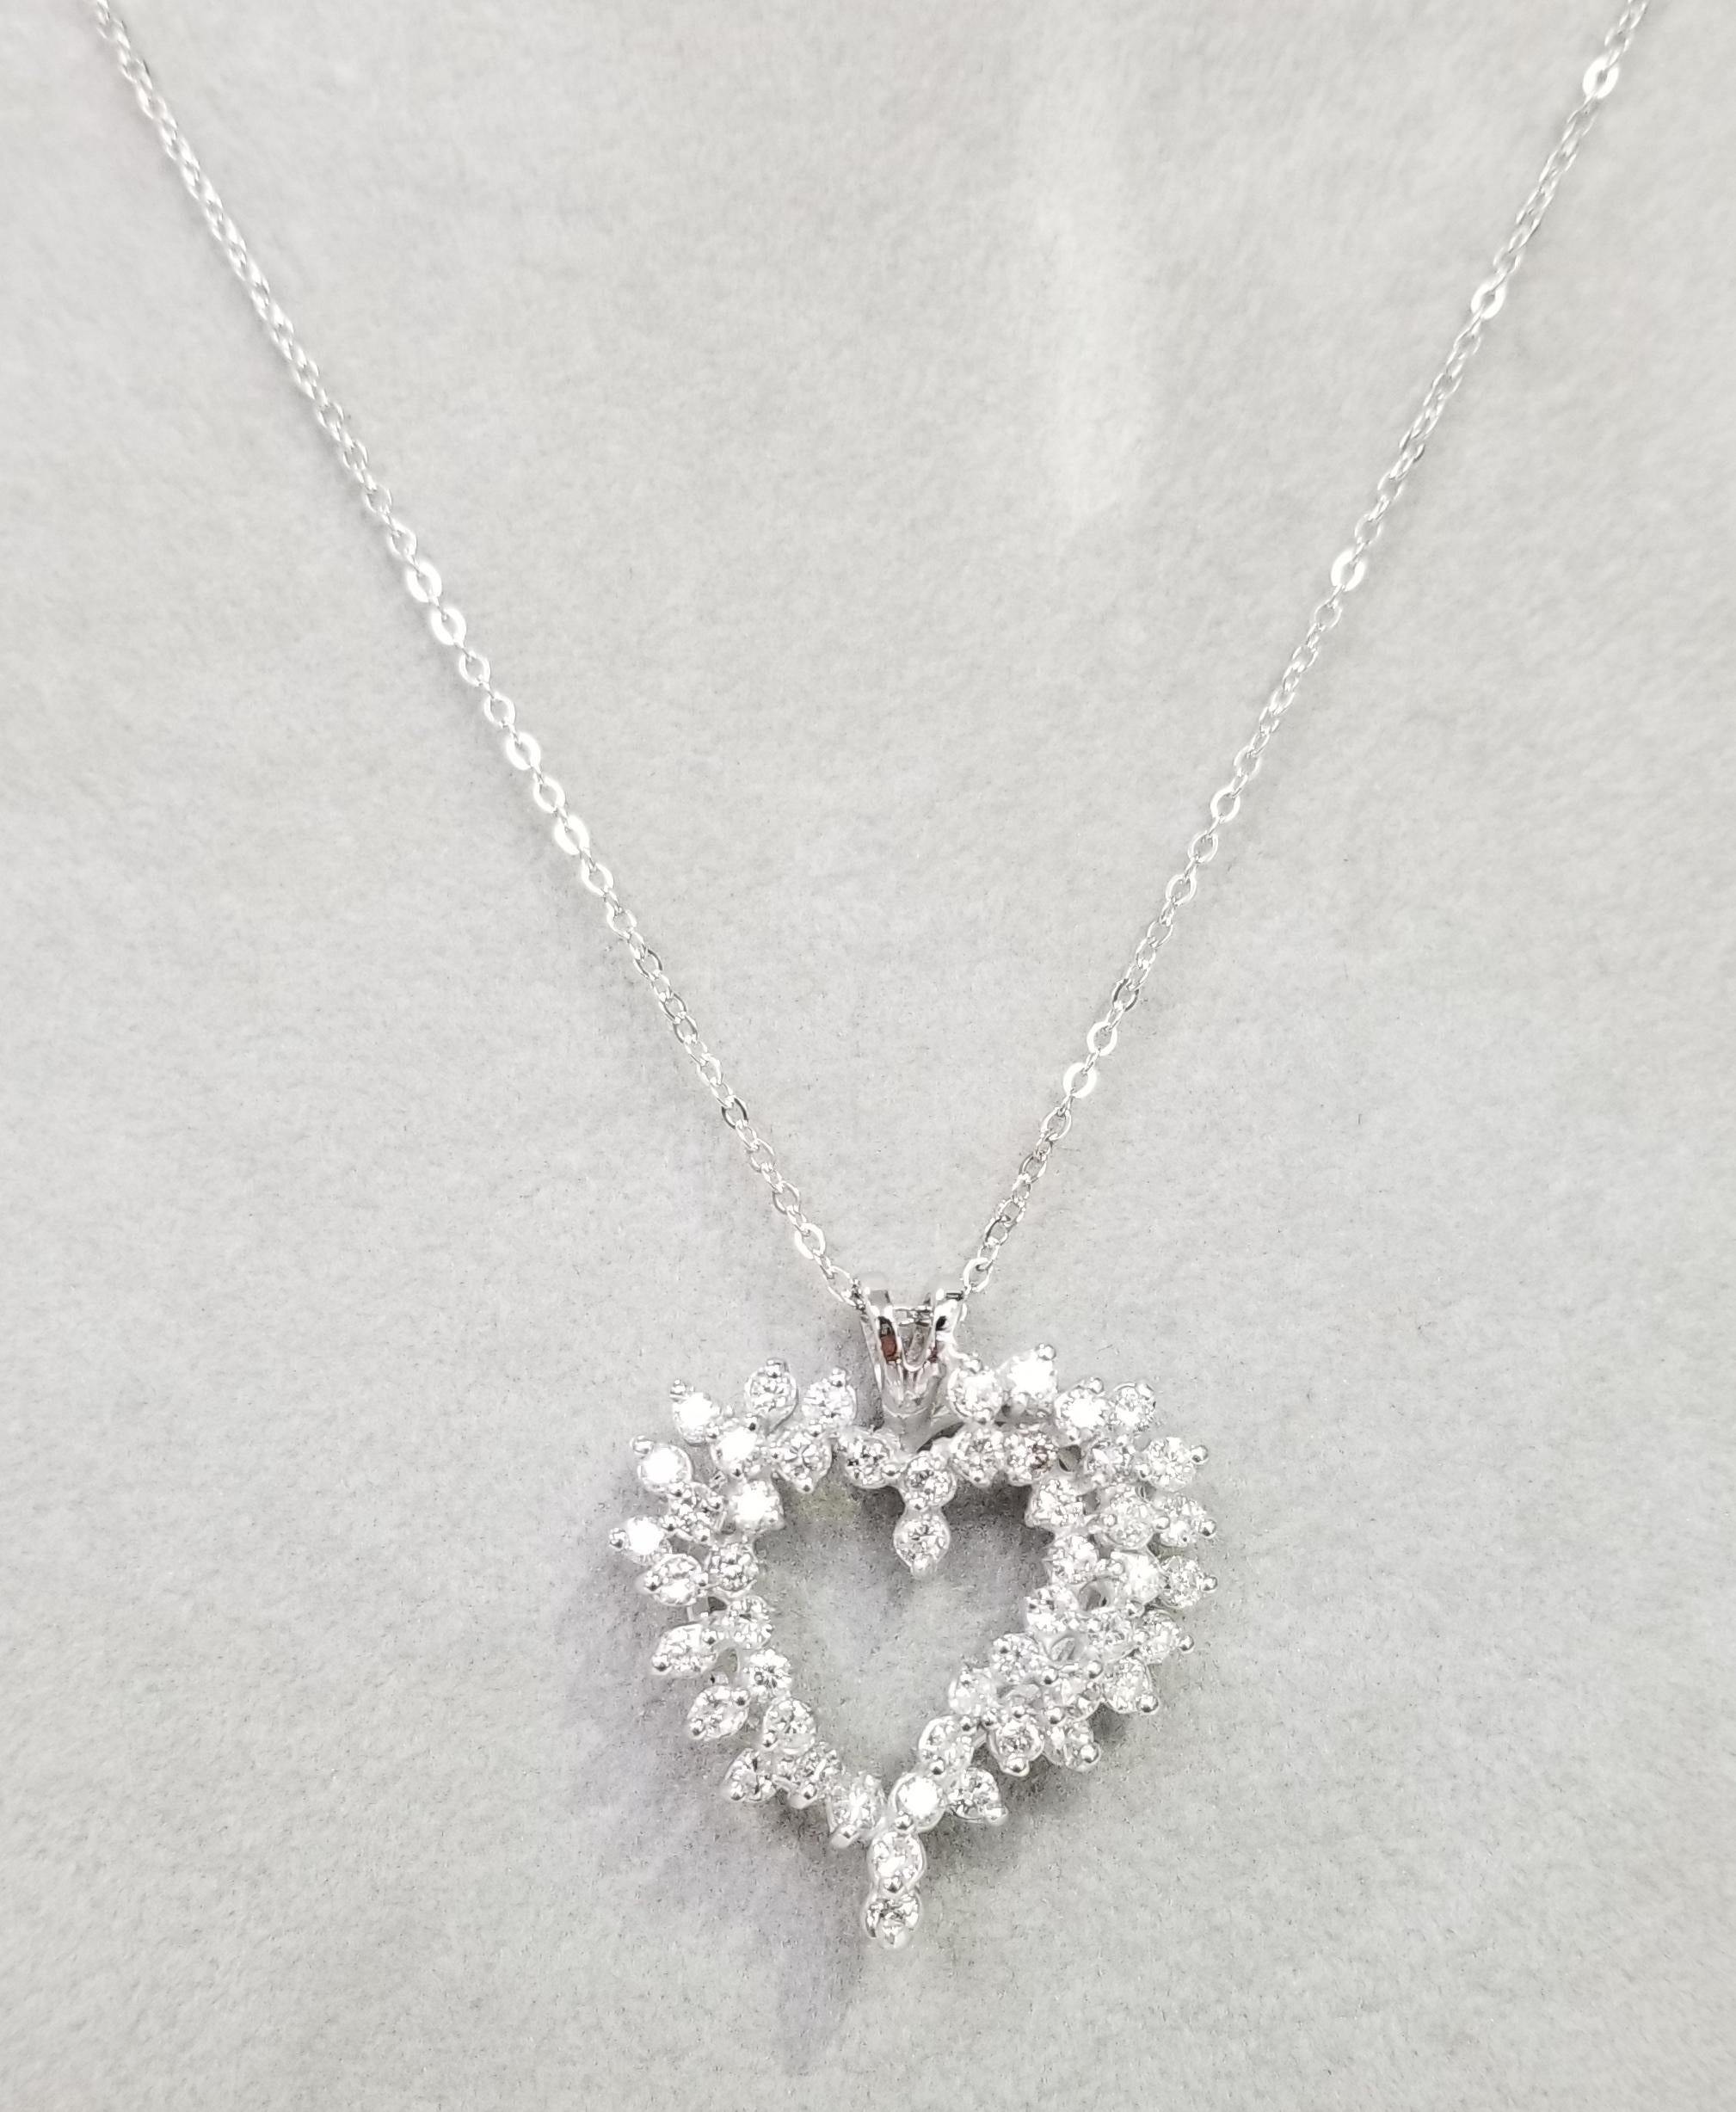 14k white gold large diamond heart pendant containing  50 round full cut diamonds weighing 2.25cts. color G, clarity SI on a 16 inch chain.